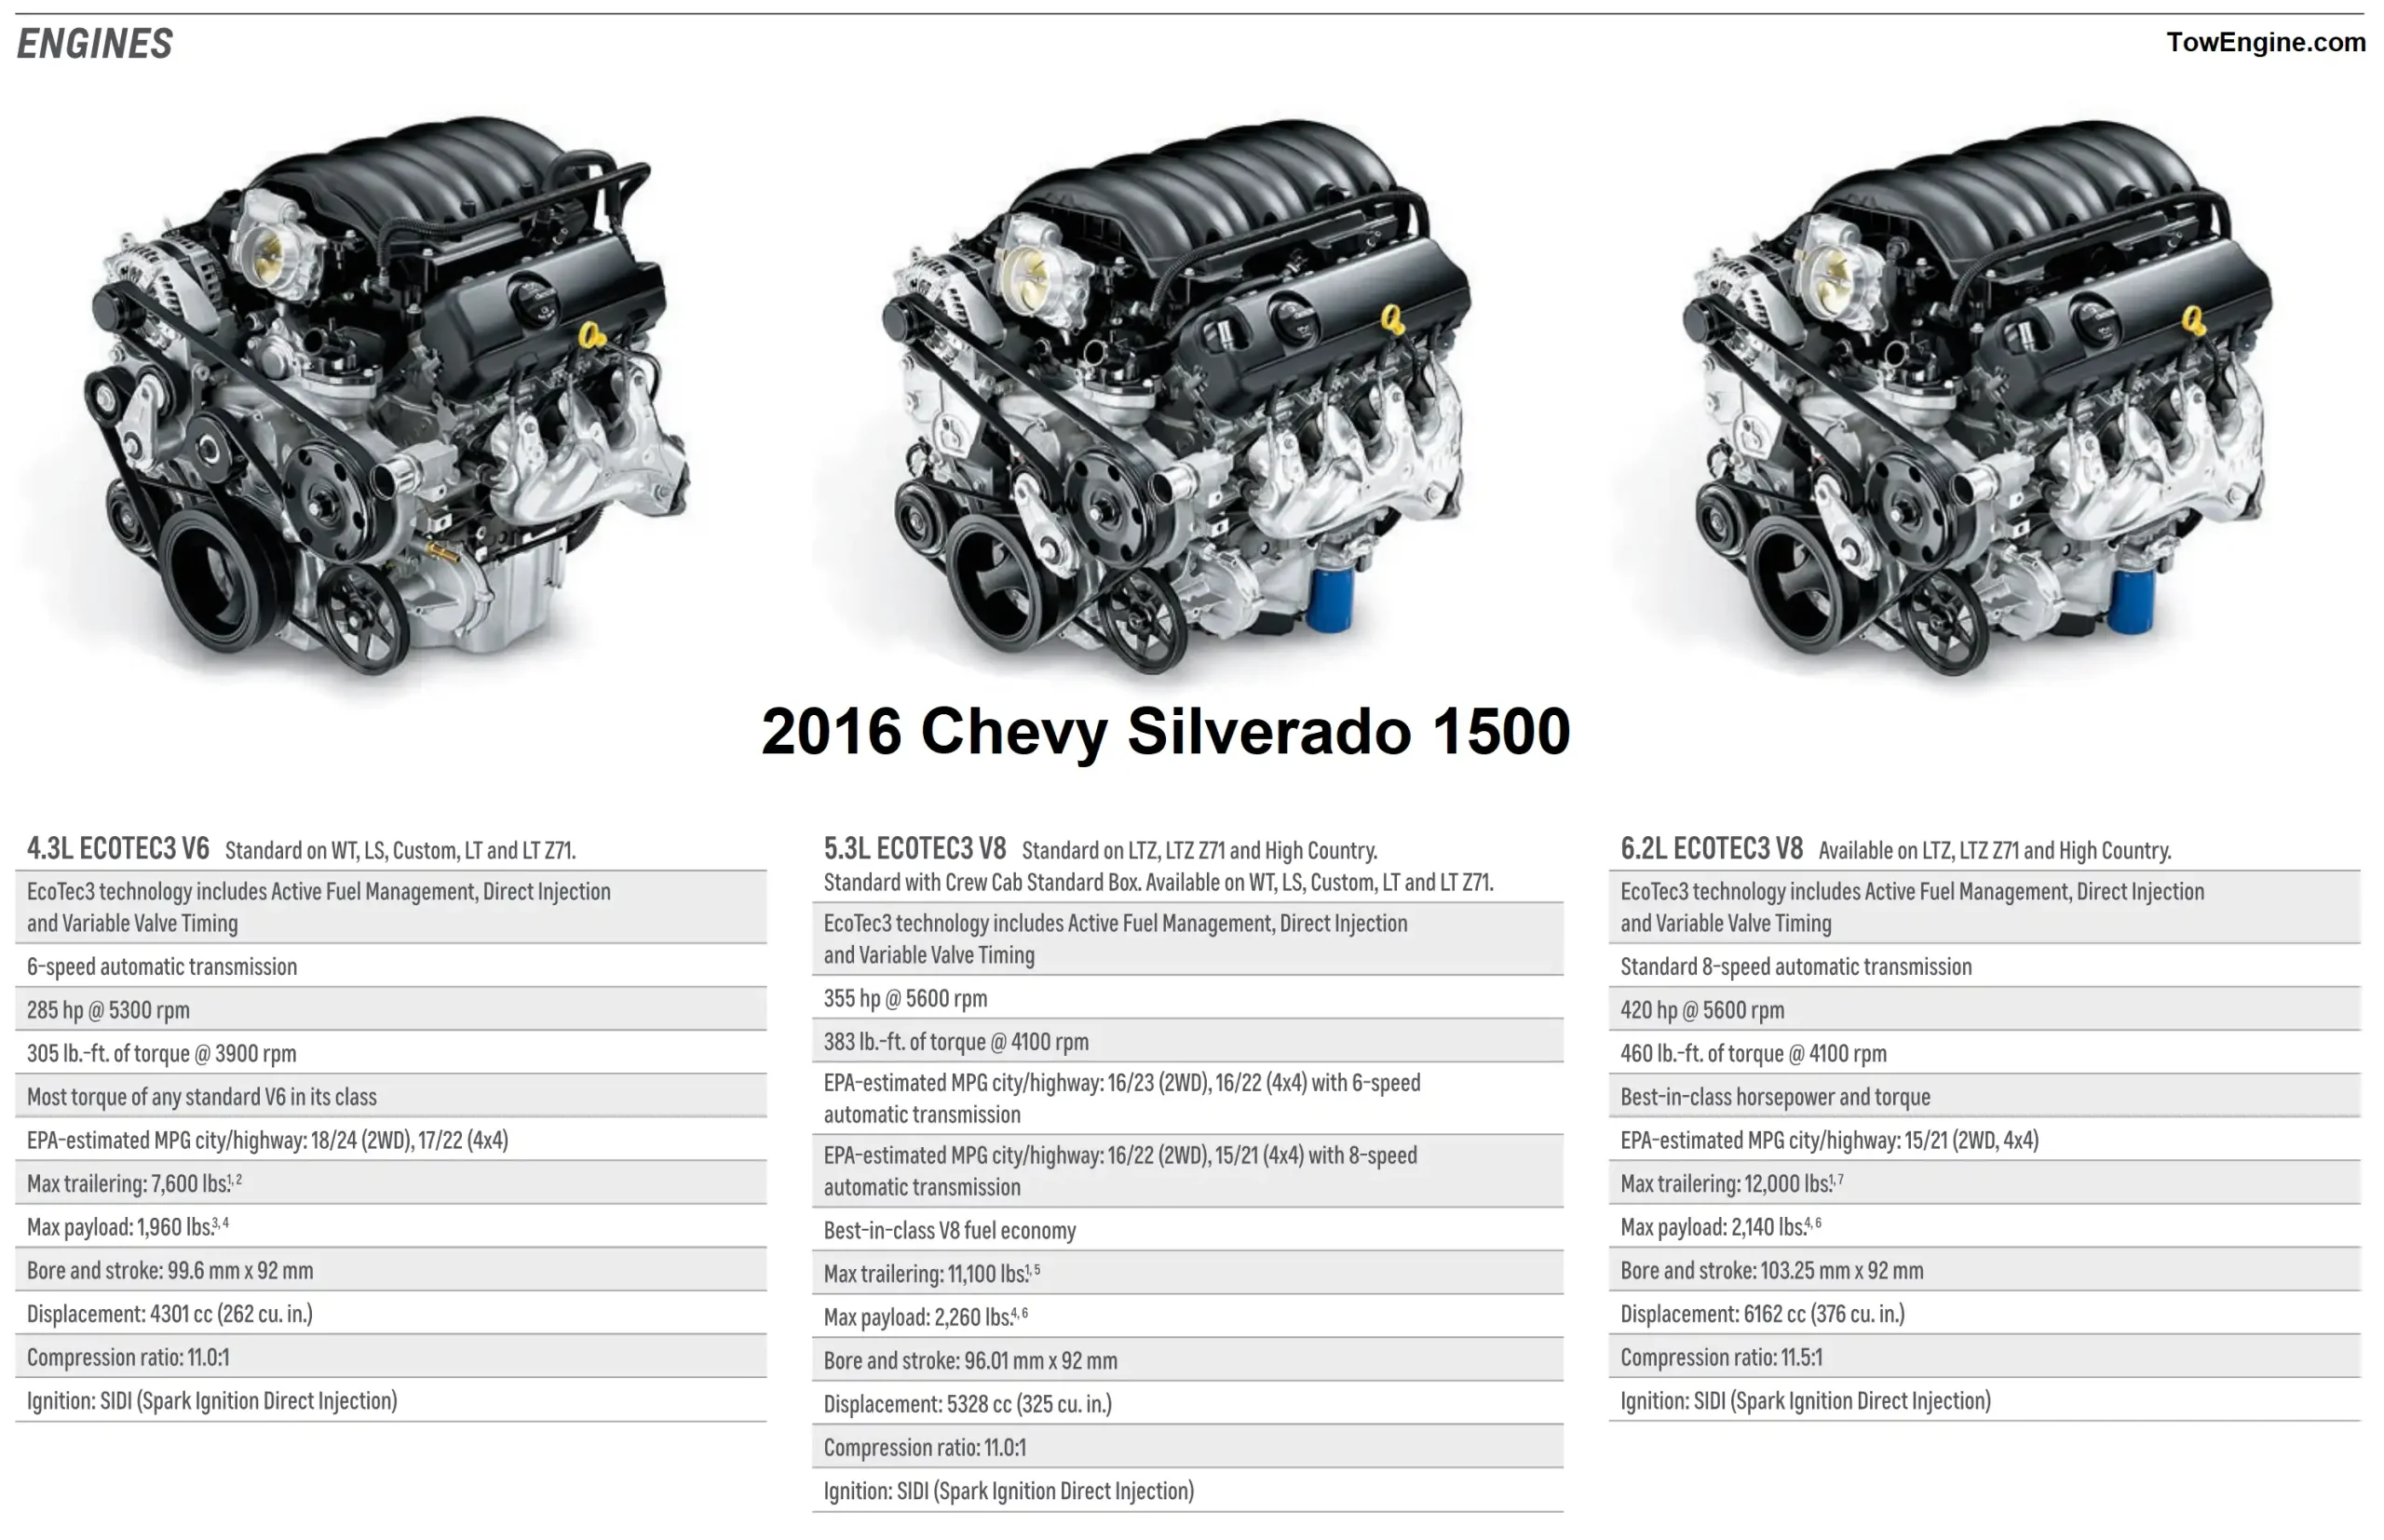 2016 Chevy Chevrolet Silverado 1500 Engines Towing Capacity and Payload Capacity Chart